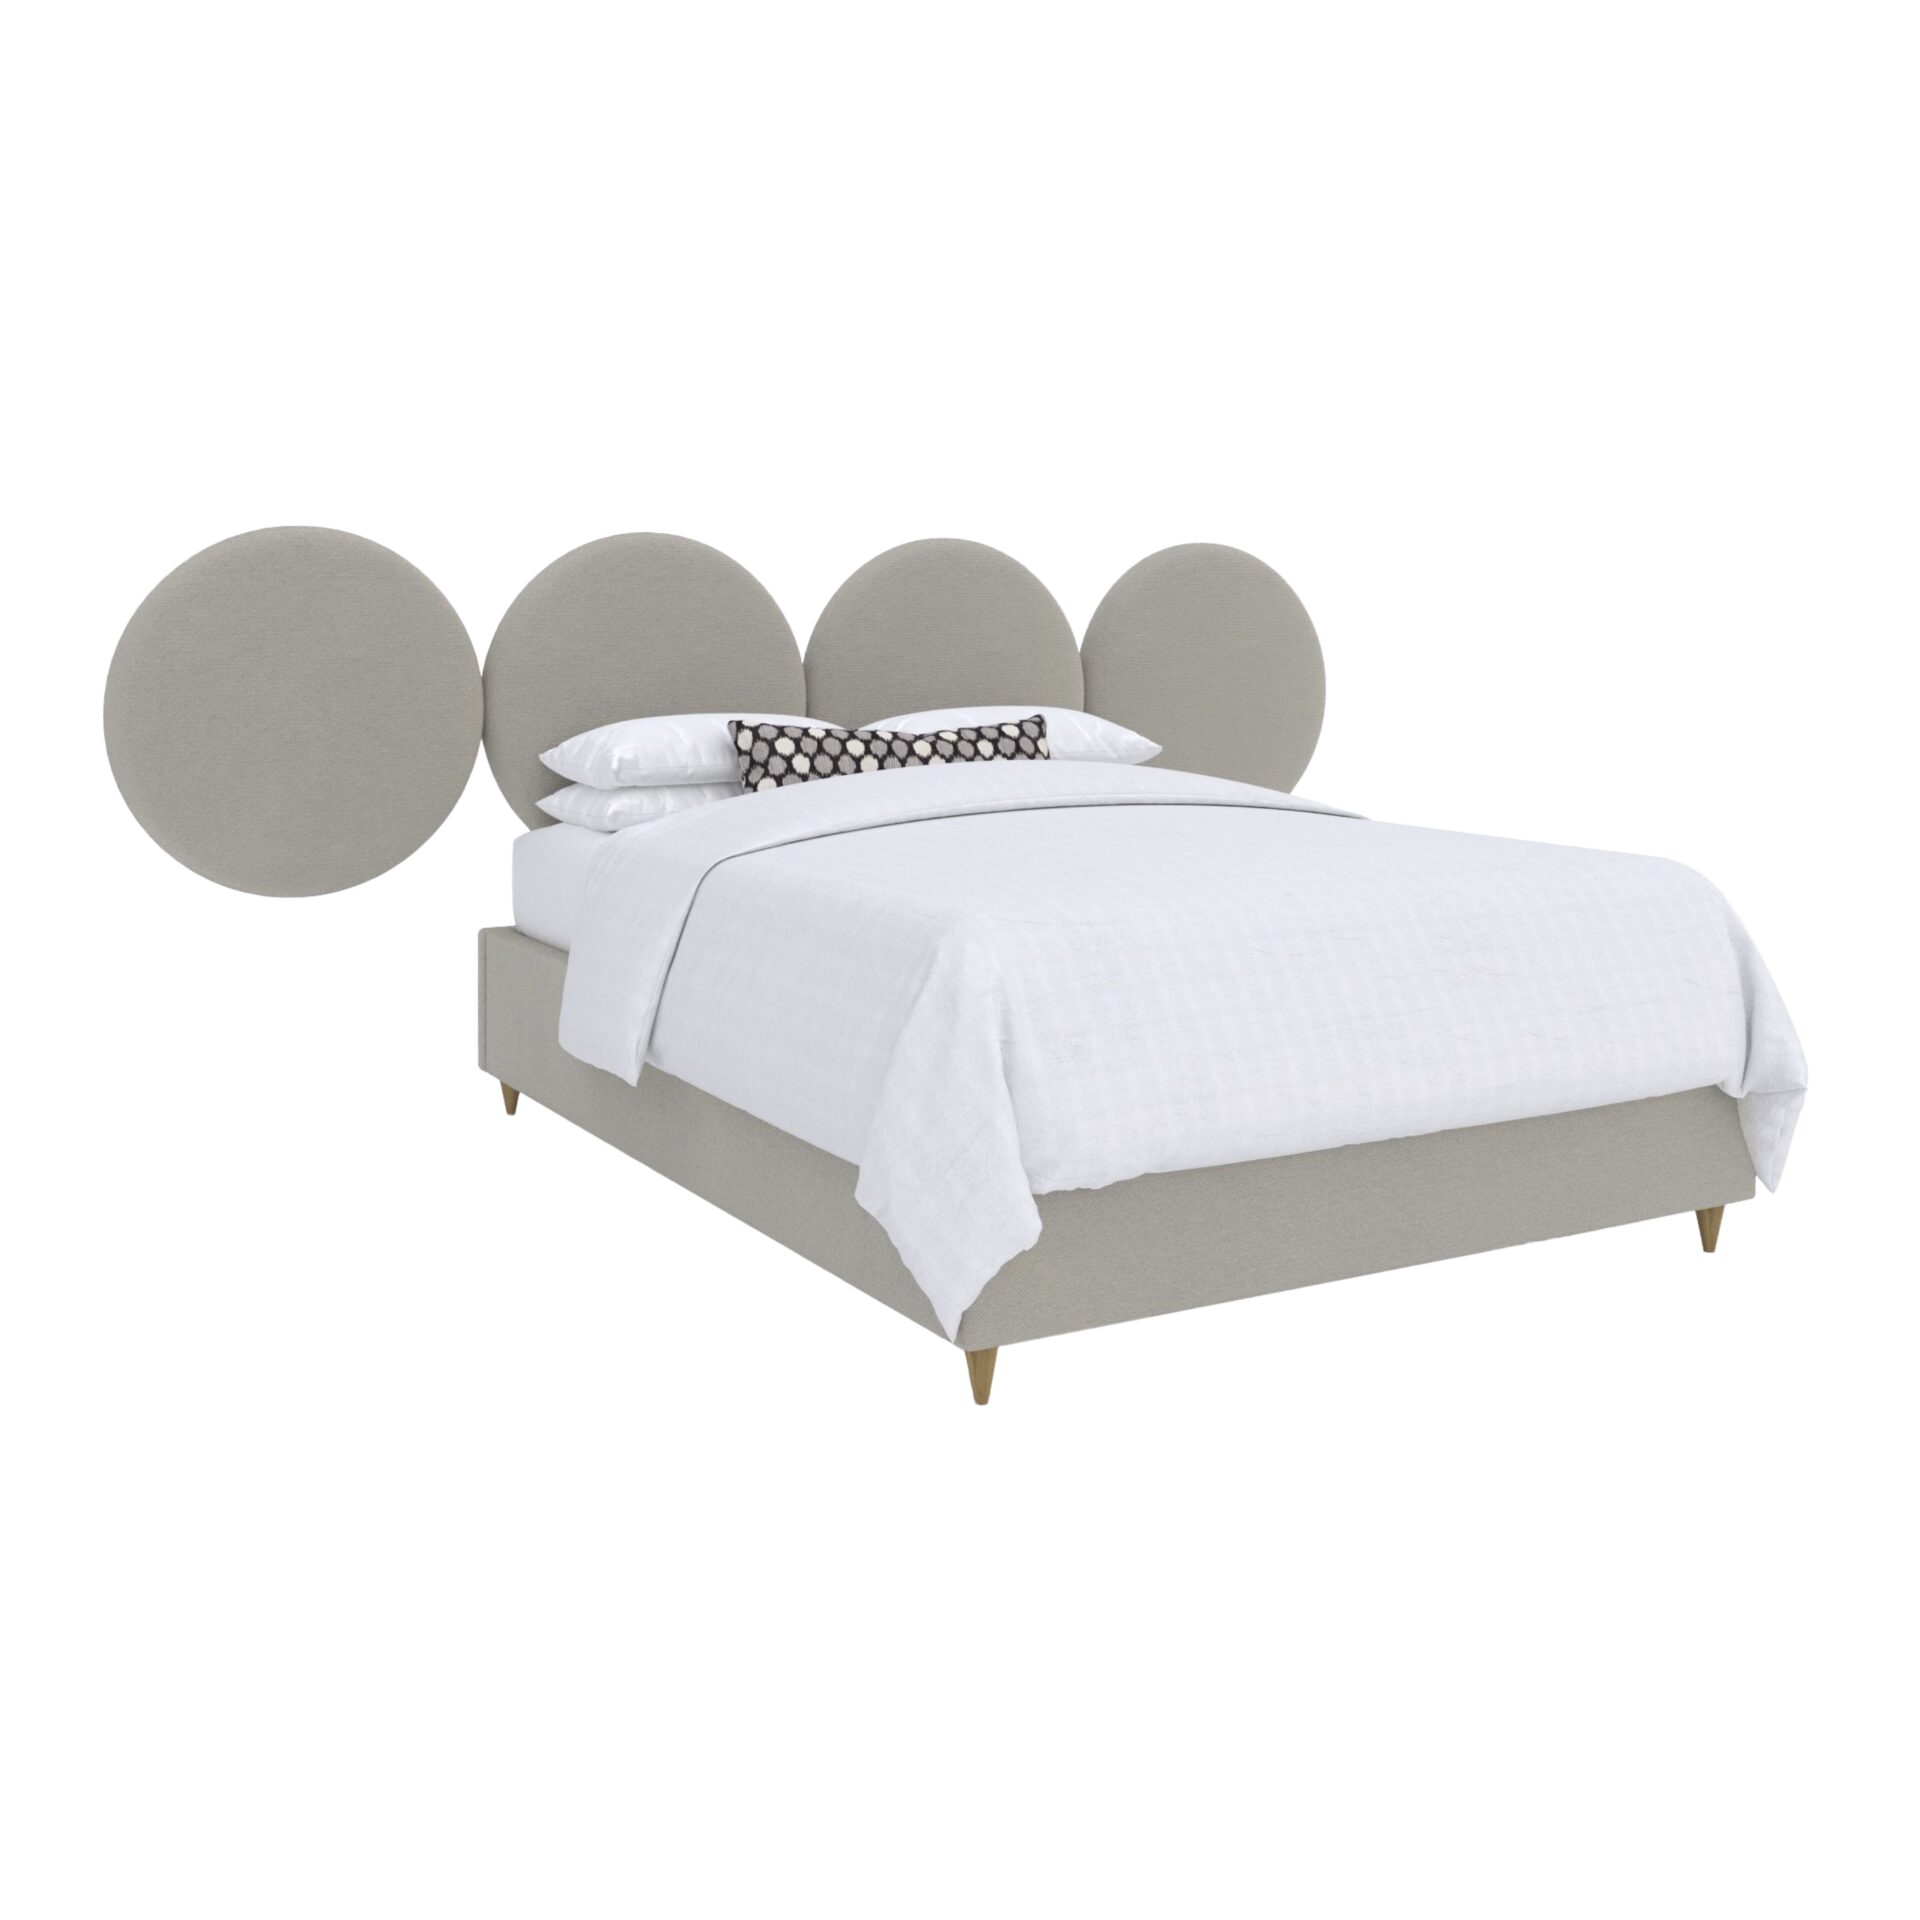 SPHEROID(QUATRO)-wall-mounted-upholstered-bed-luxury-furniture-blend-home-furnishings